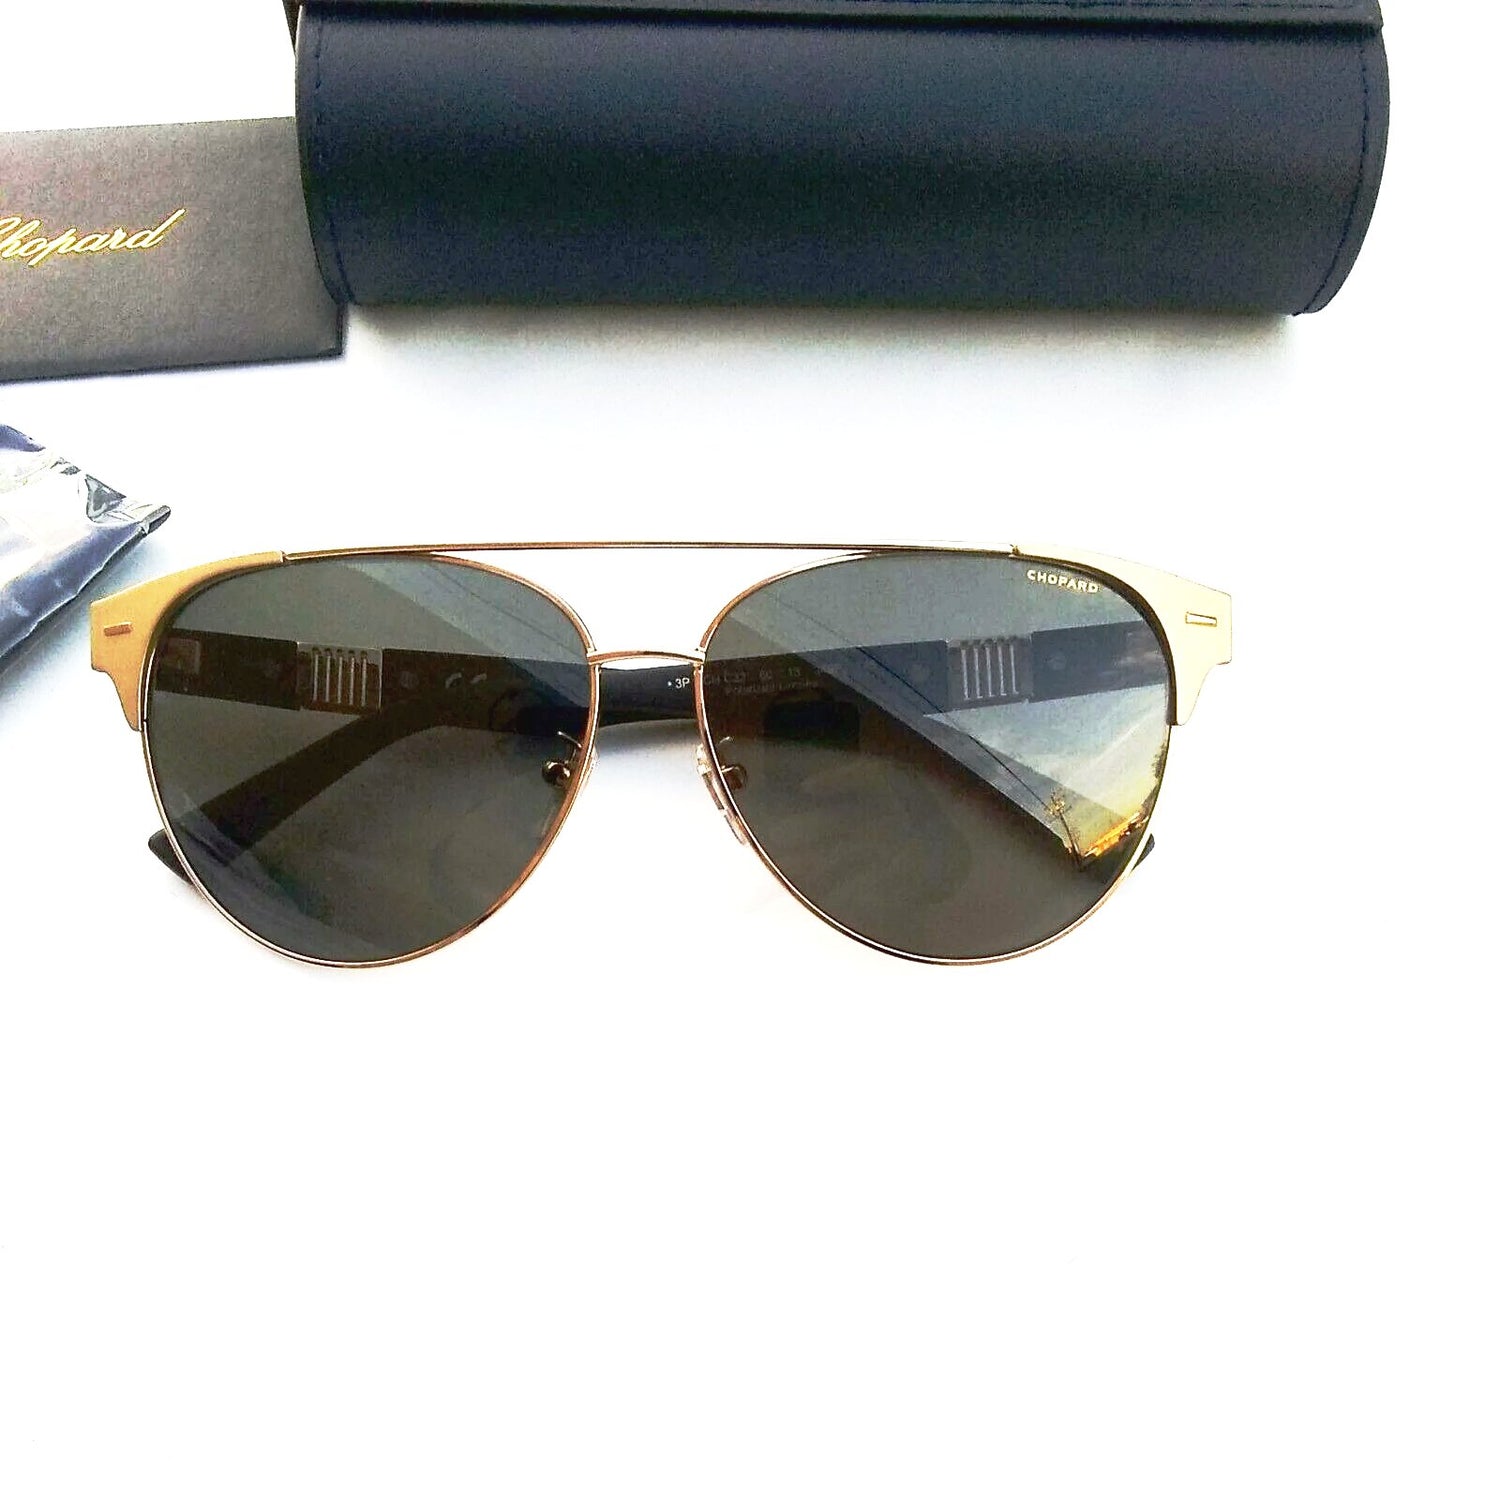 Chopard women Polarized new sunglasses schc32 60/13 gold black frame made in Italy